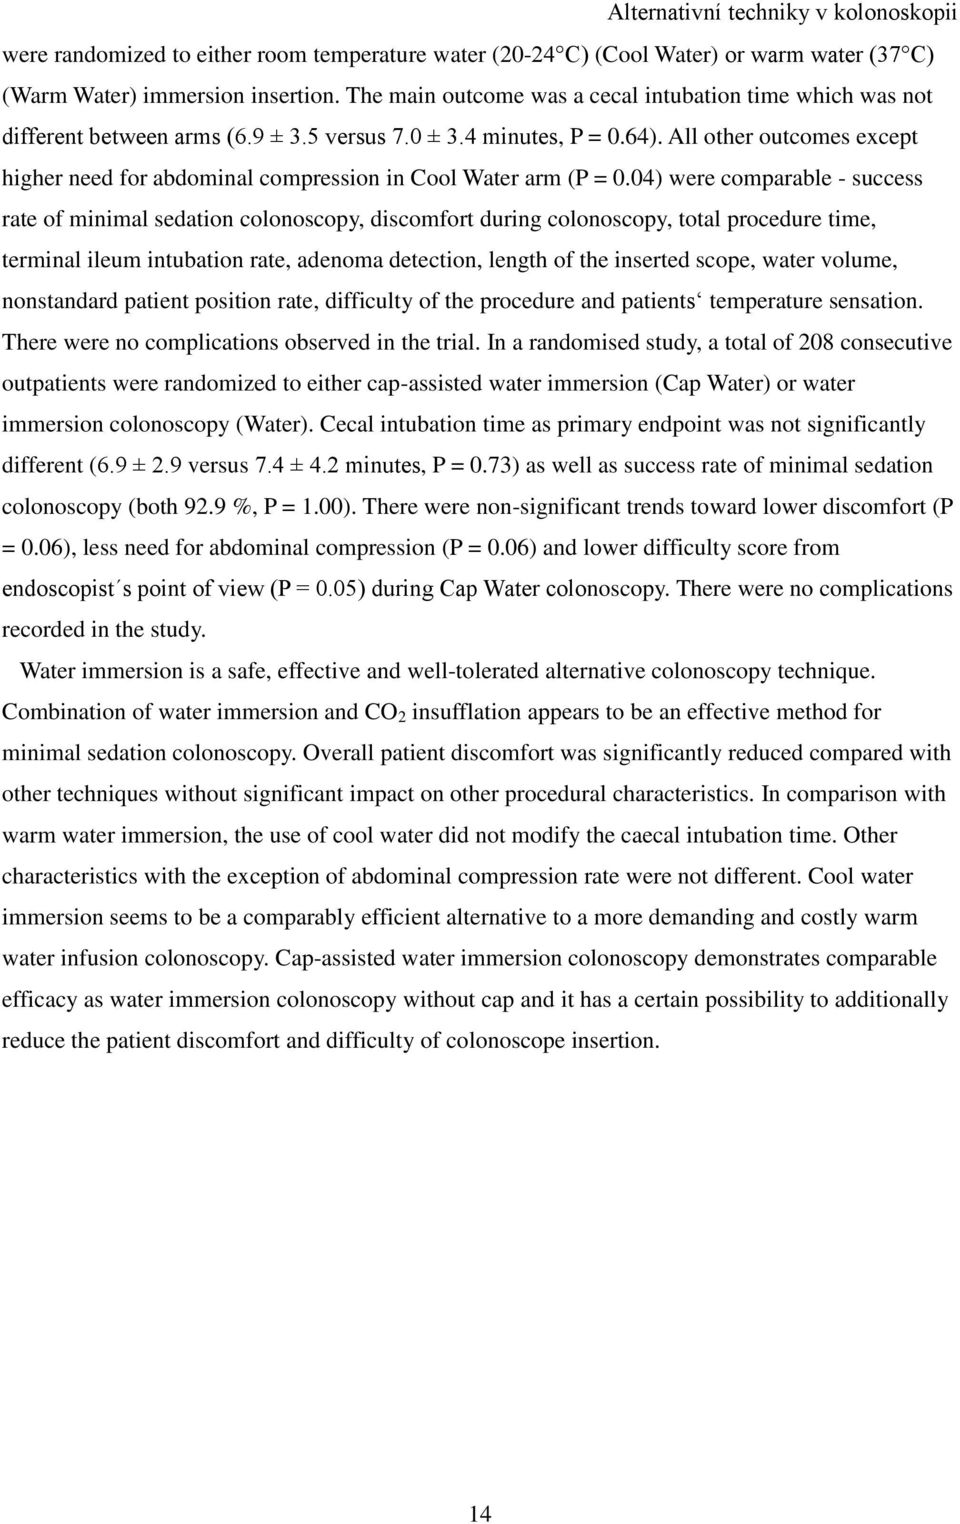 All other outcomes except higher need for abdominal compression in Cool Water arm (P = 0.